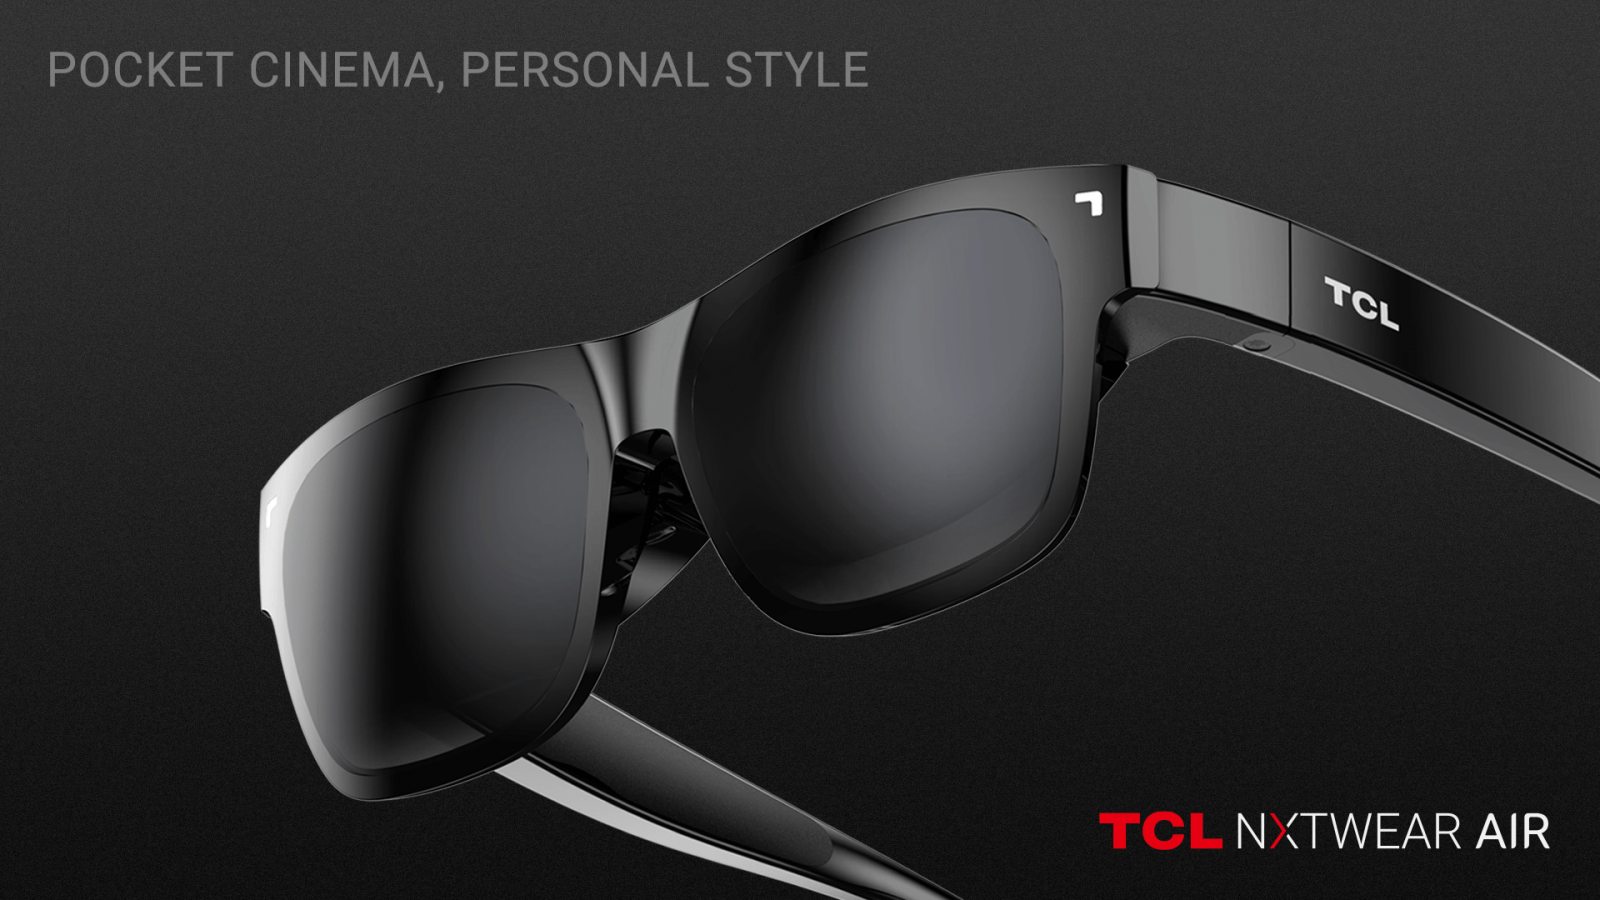 TCL NXTWEAR AIR makes wearable displays look cool - Phandroid